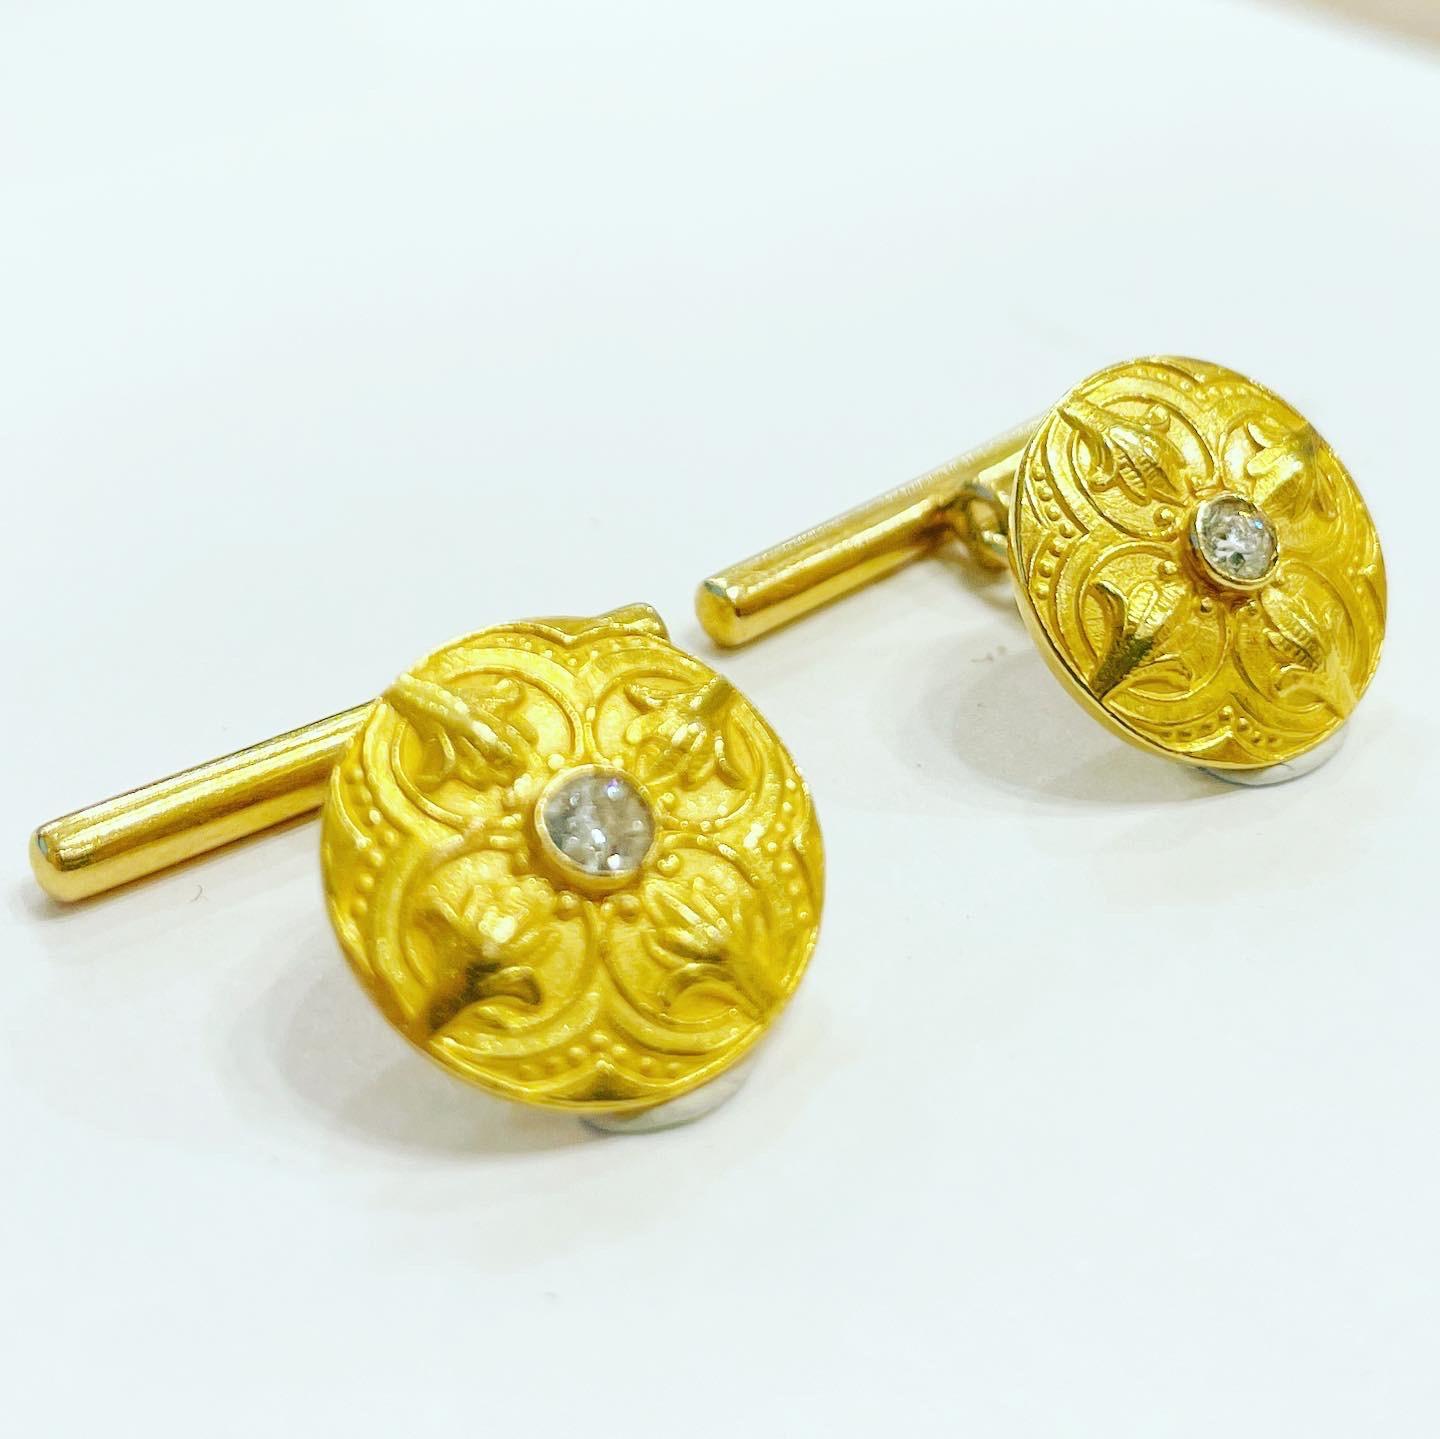 A chic pair of cufflinks. 
Round nuanced 18k yellow gold cufflinks, set with 2 old european cut diamonds with a total approximate weight of 0.3 carats. 
The fastener is a jaseron chain. 
In original box.
The cufflinks are unmarked but have been